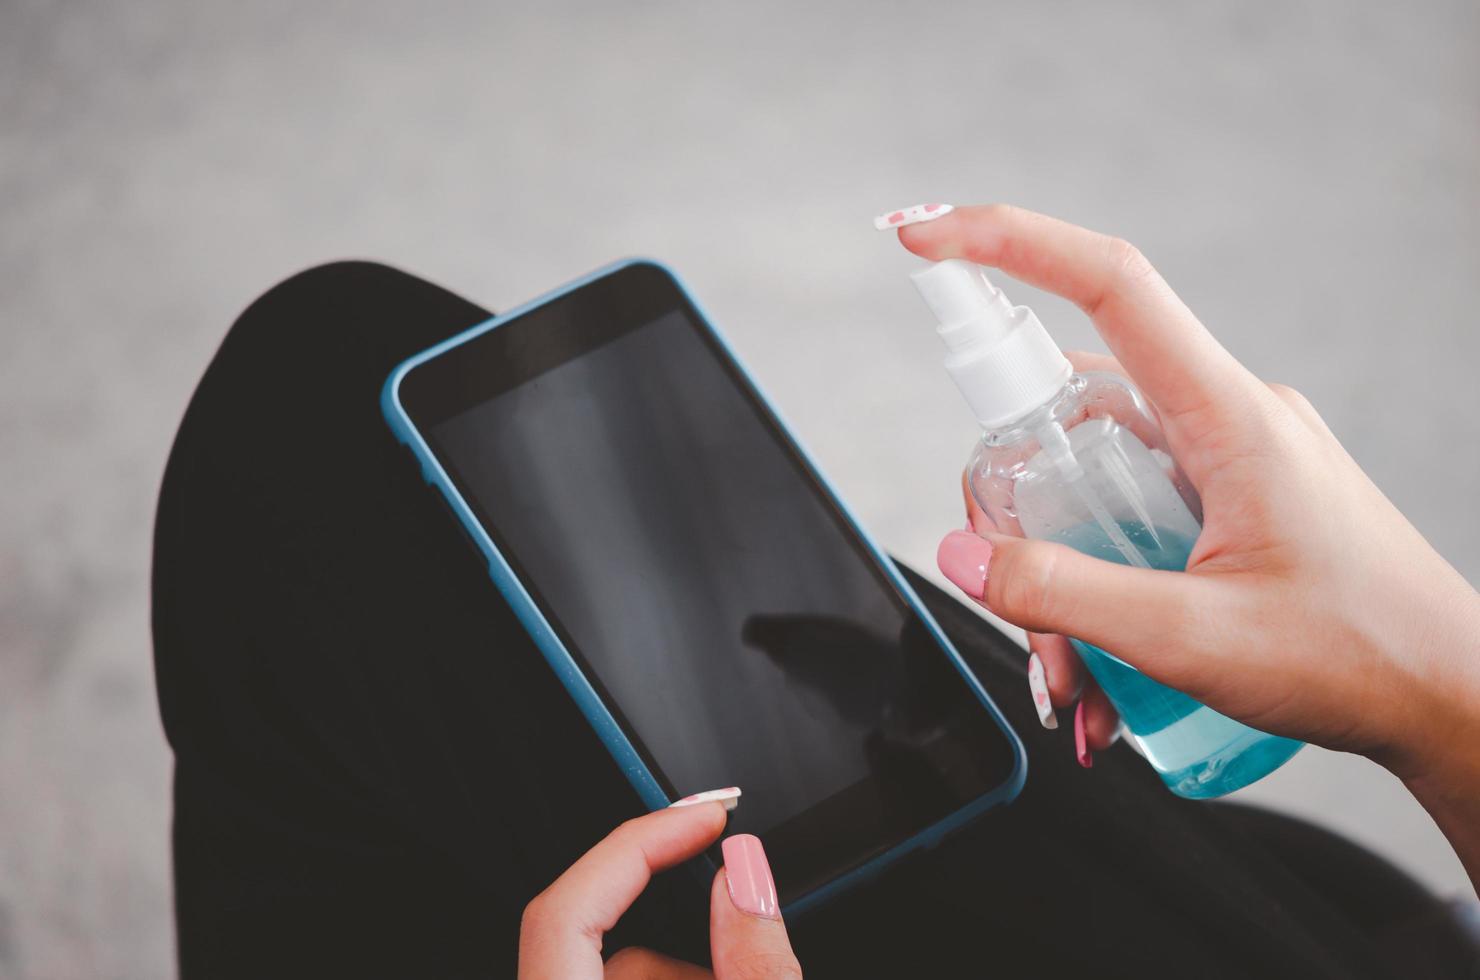 Spray to disinfect mobile phone with alcohol. concept of health care to prevent disease photo